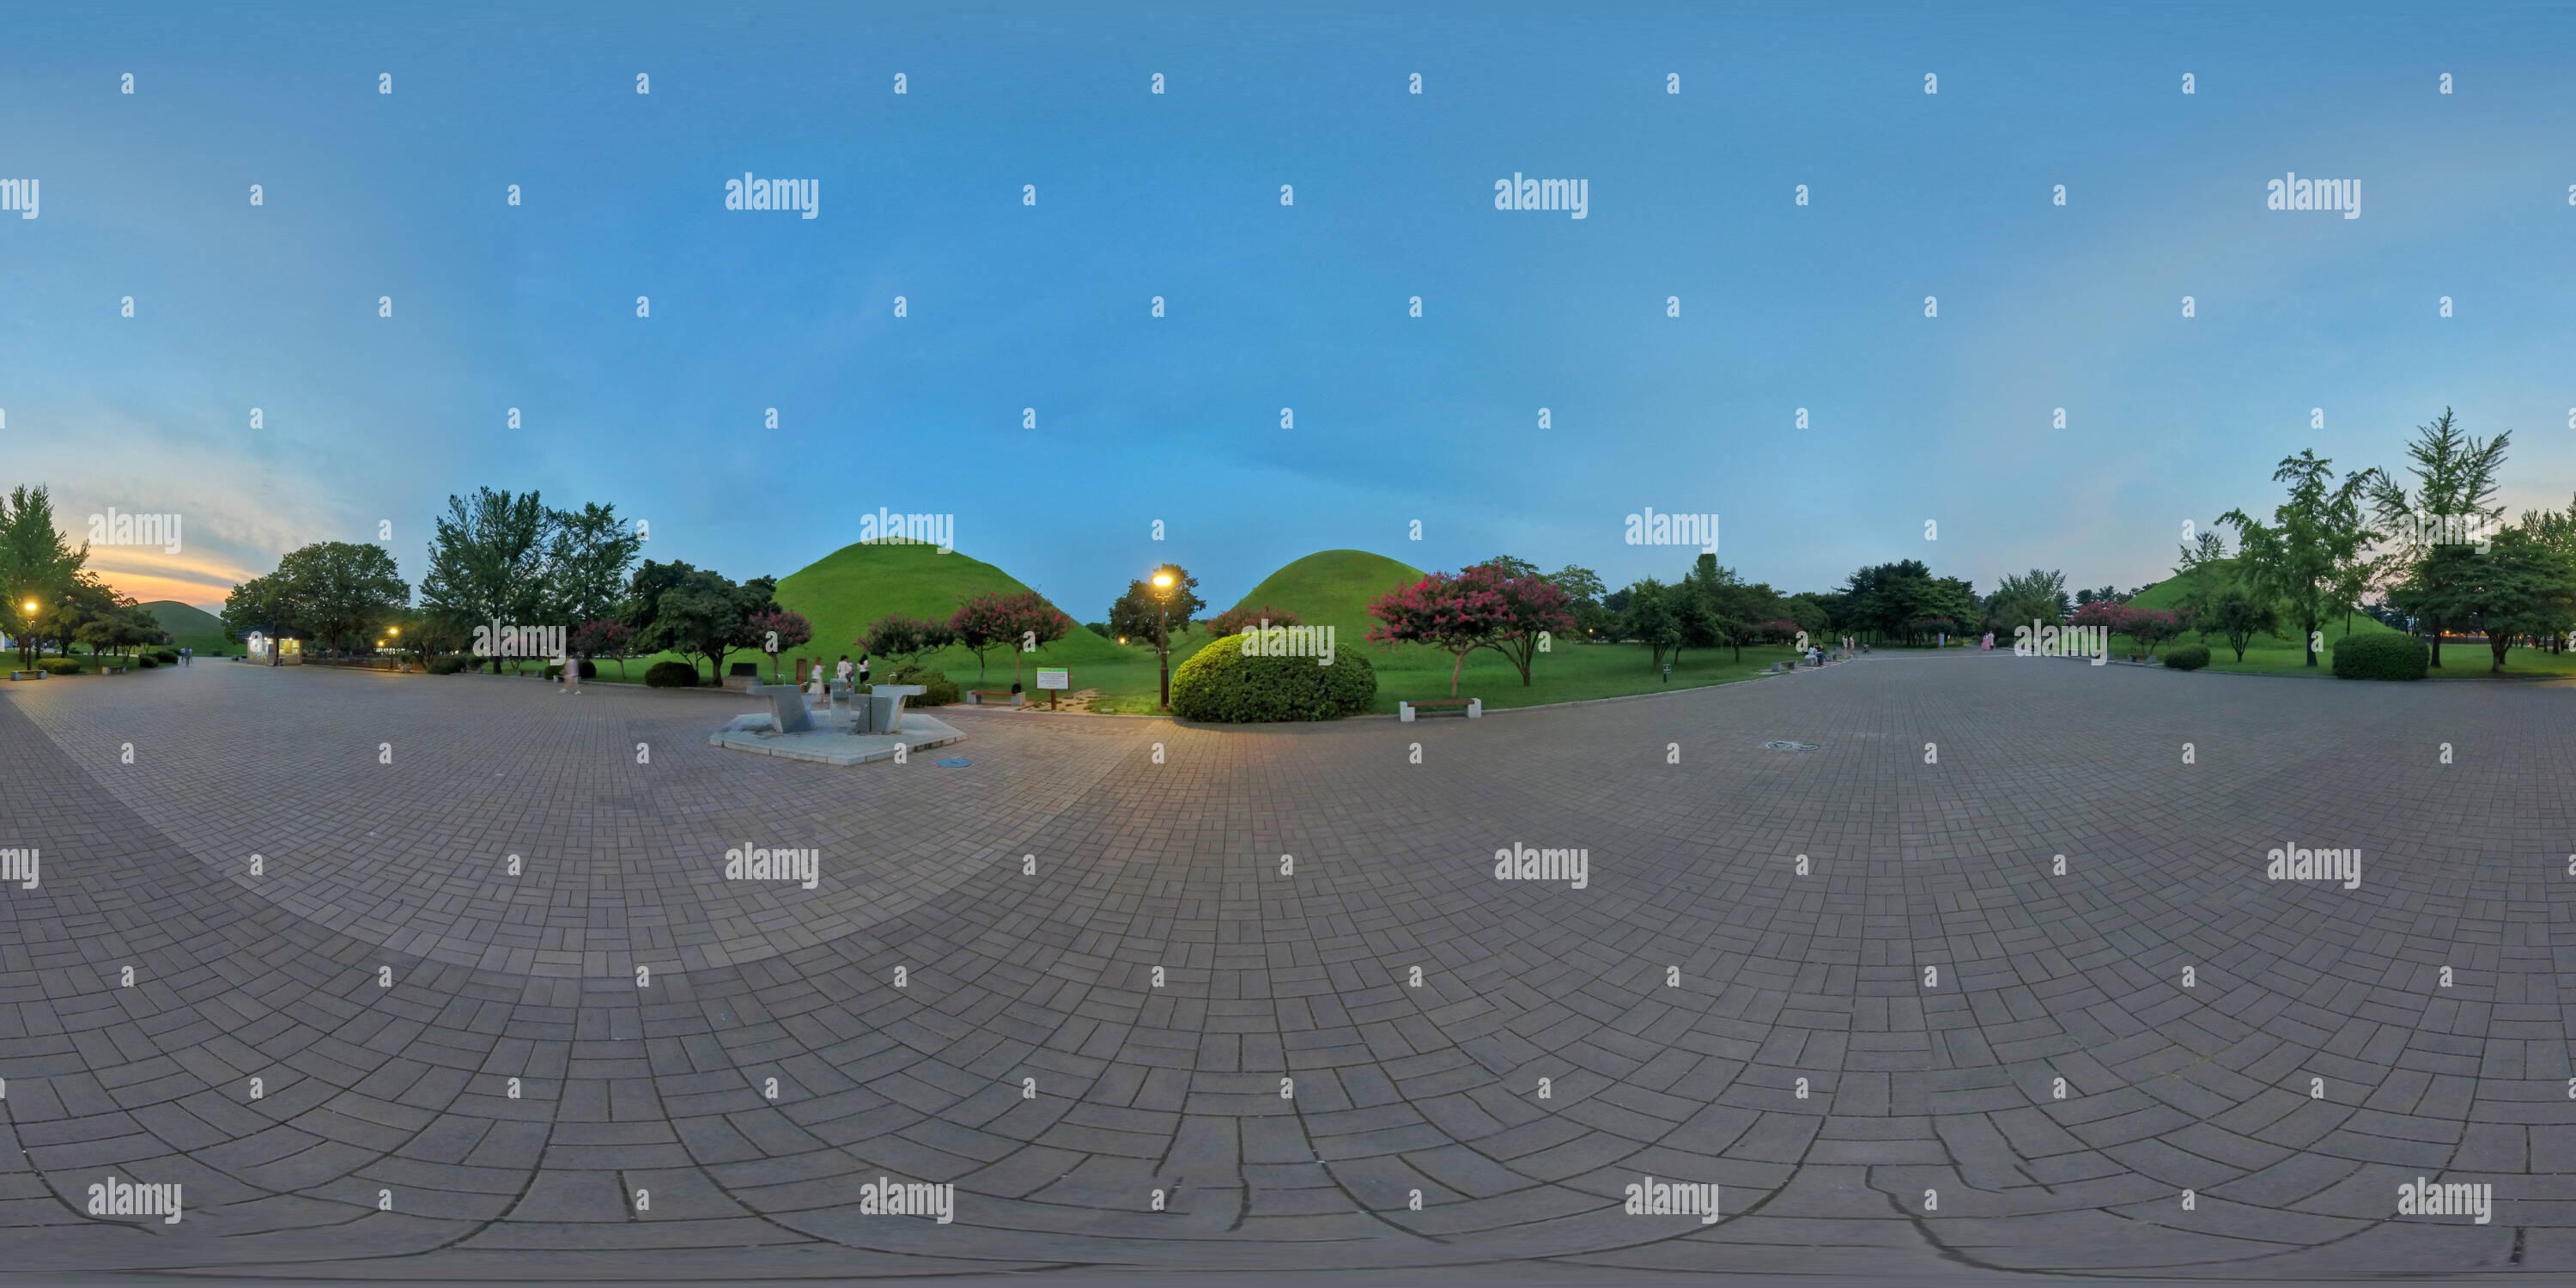 360 degree panoramic view of Gyeongju, South Korea 26 August 2019: Daereungwon Ancient Tomb Complex 360 Degrees Panoramic view. Large ancient tombs of kings and nobles of the Sill